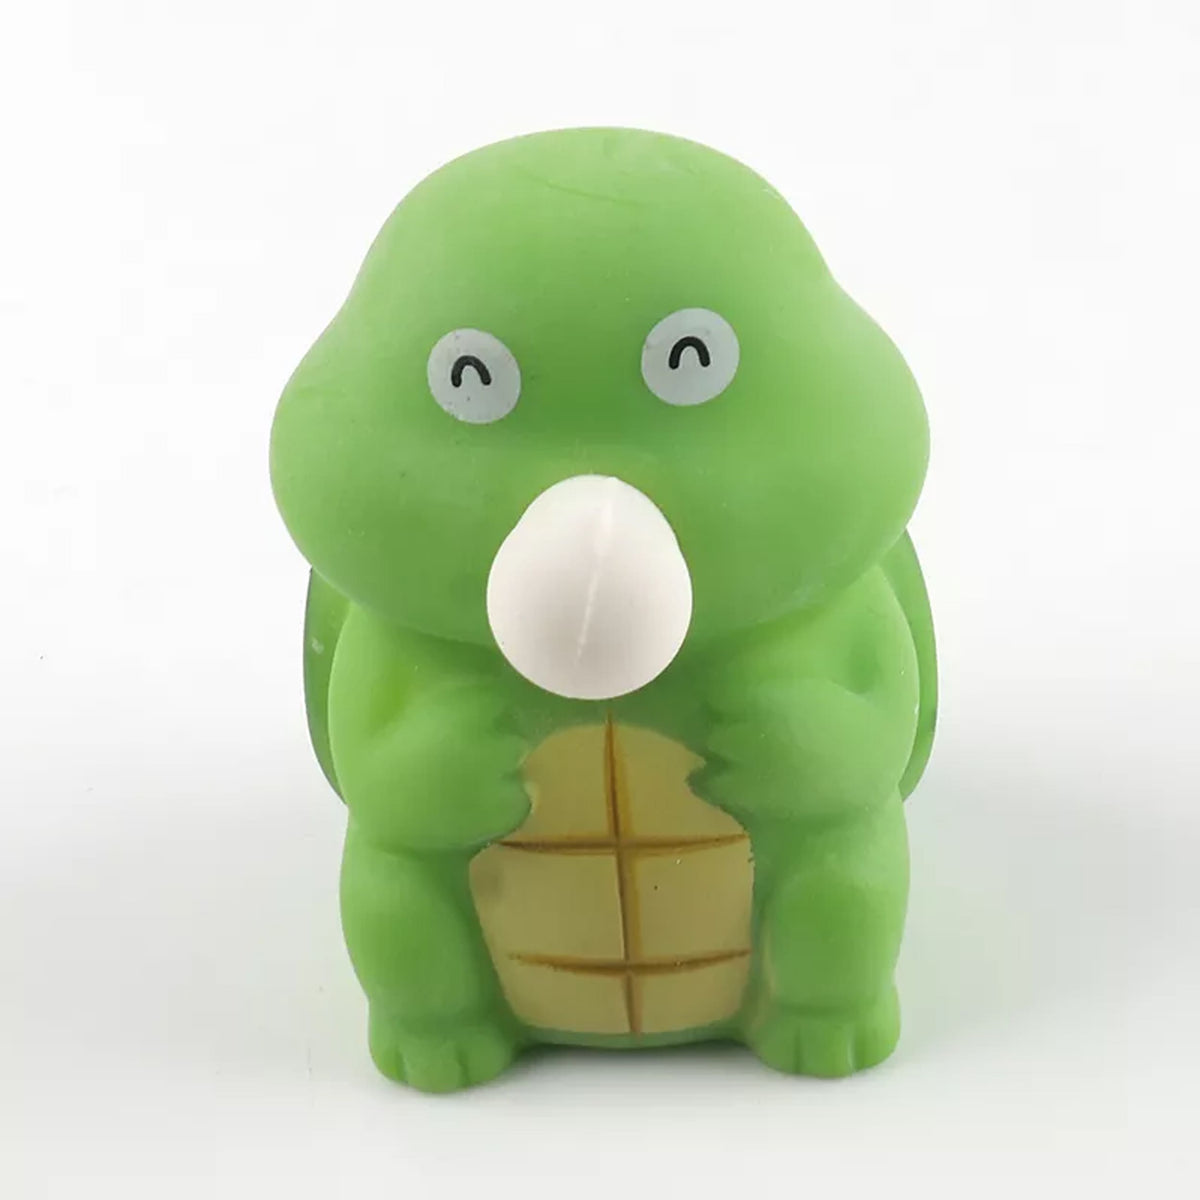 Tortoise Shaped Squeeze Toy for Kids